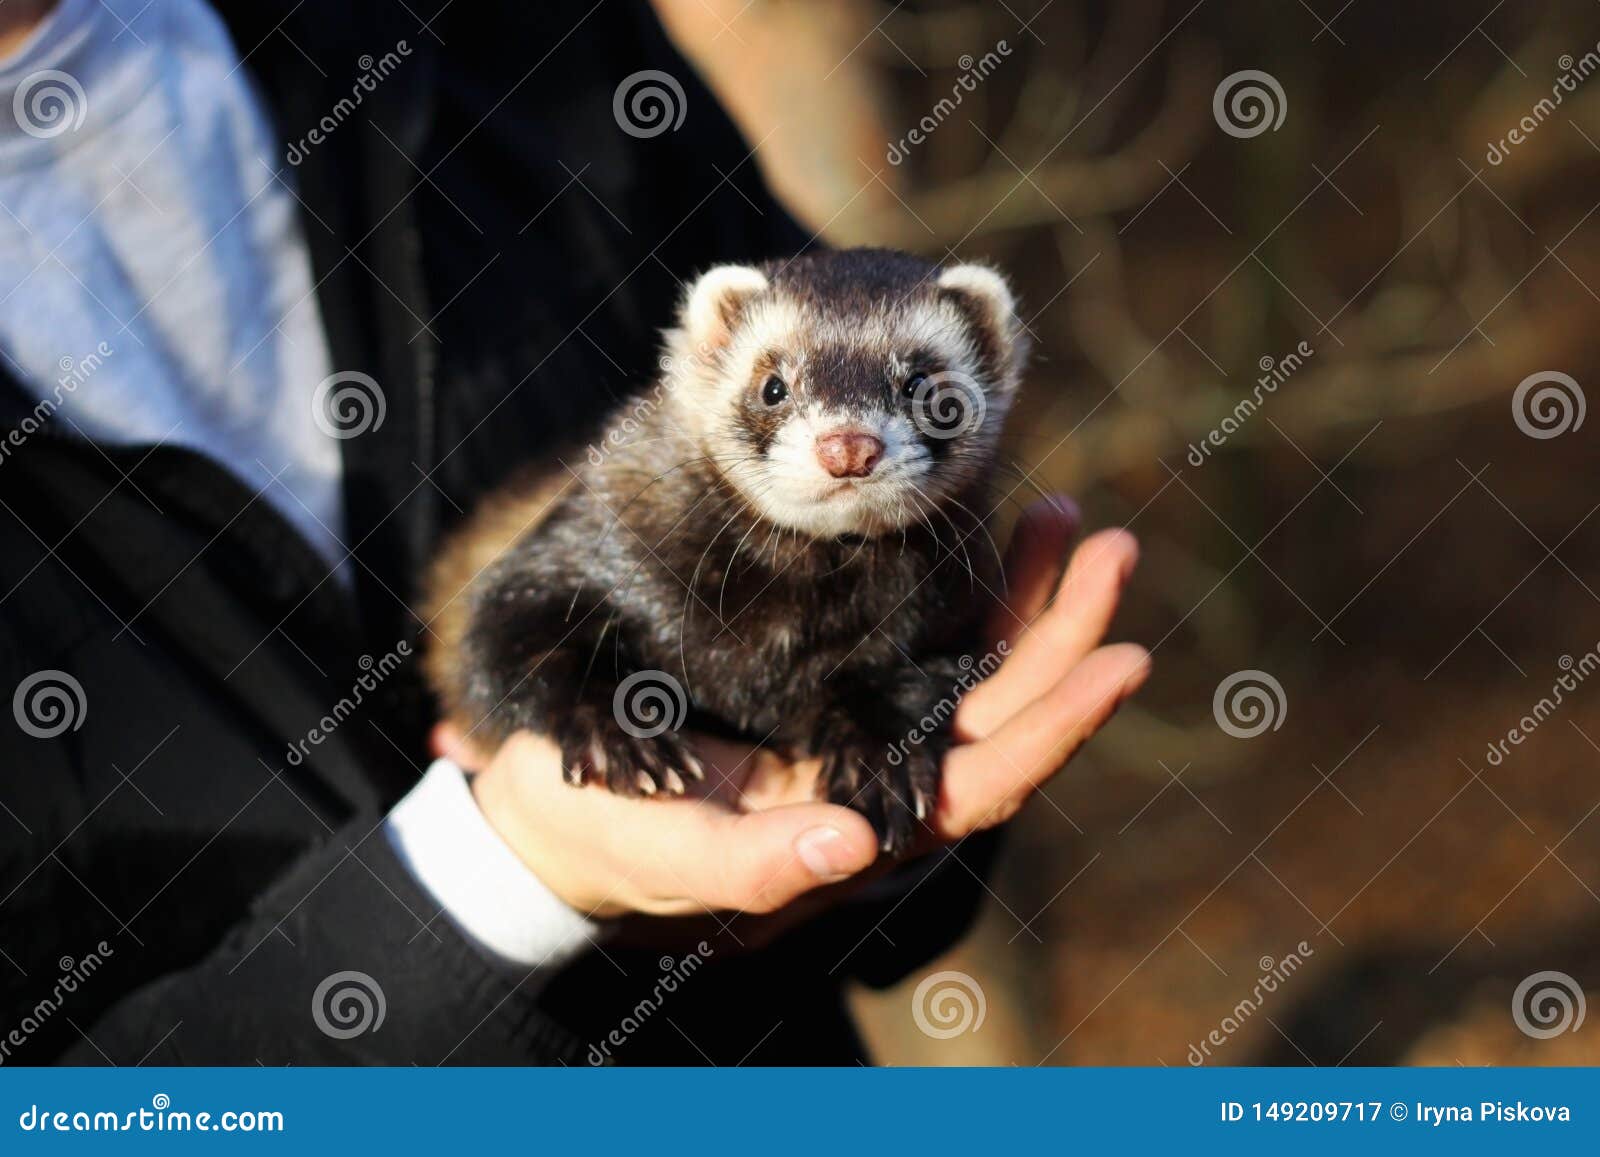 Black And White Ferret In The Hands Of A Woman Stock Image Image Of Blackfooted Sable 149209717